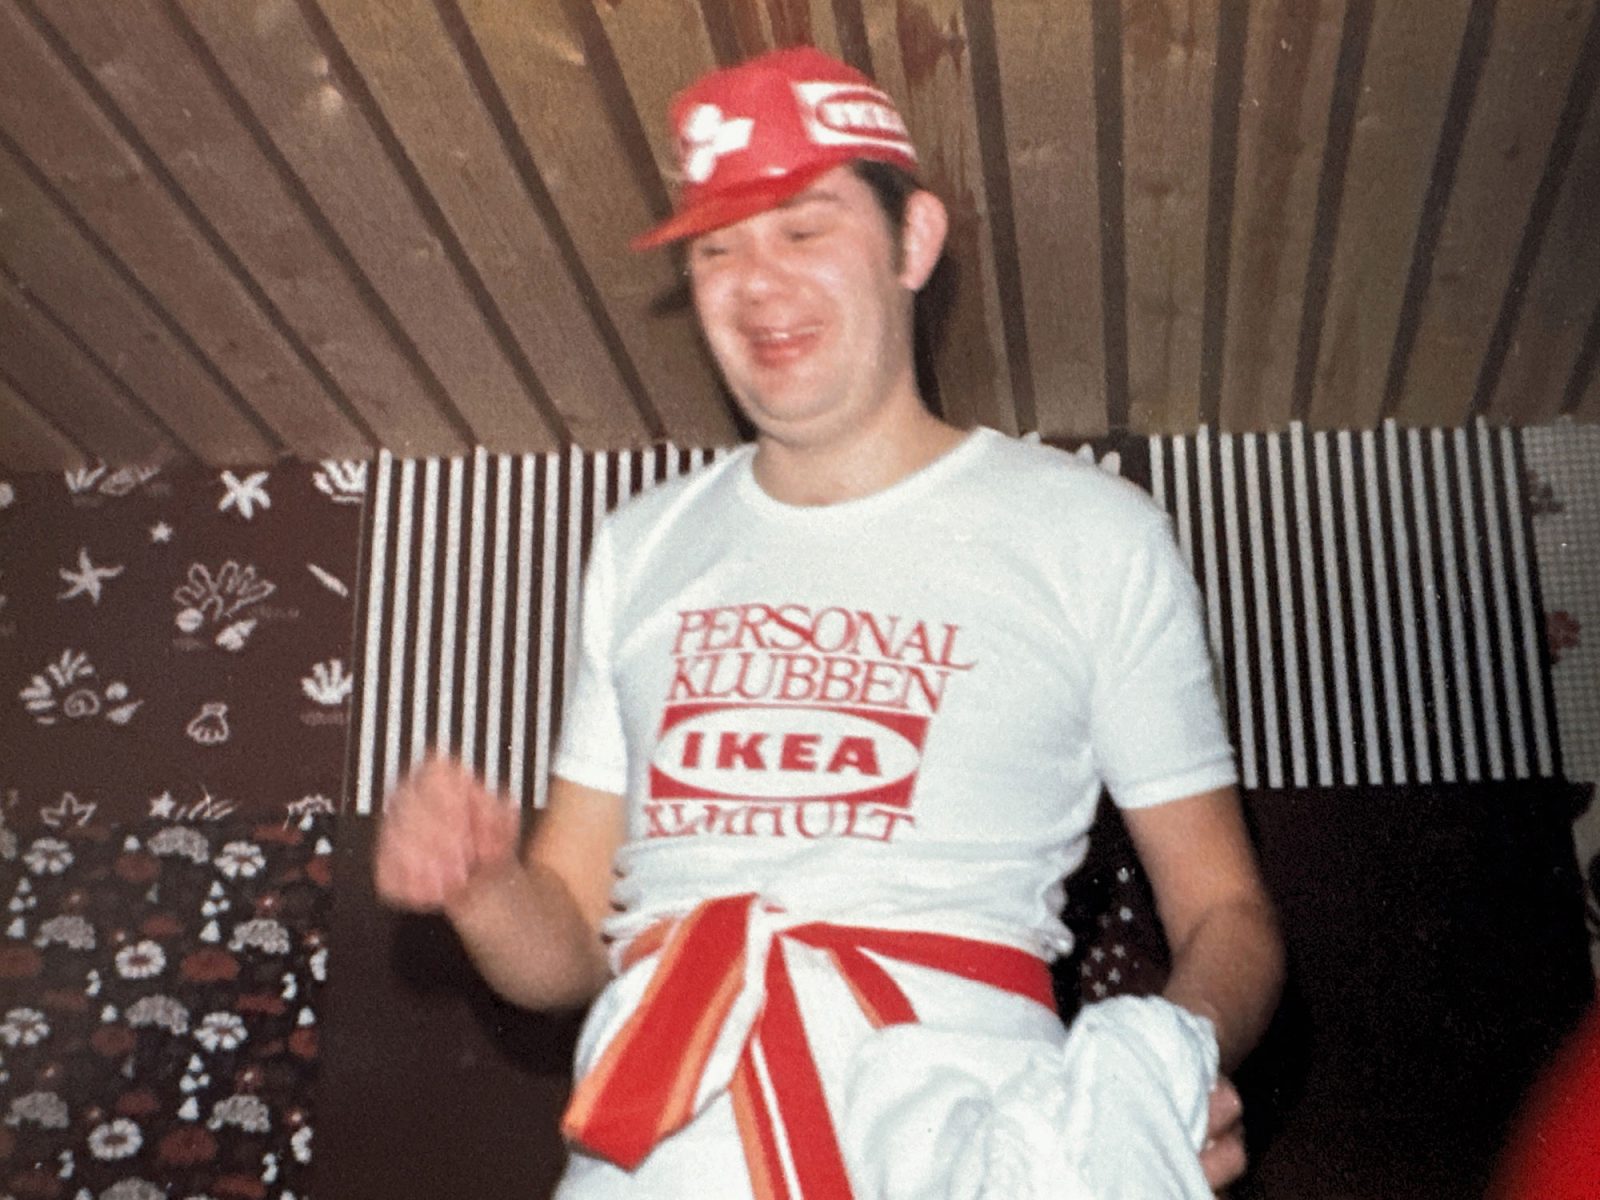 Dark-haired young man, Lars Göran Peterson, in a white IKEA T-shirt and red cap.